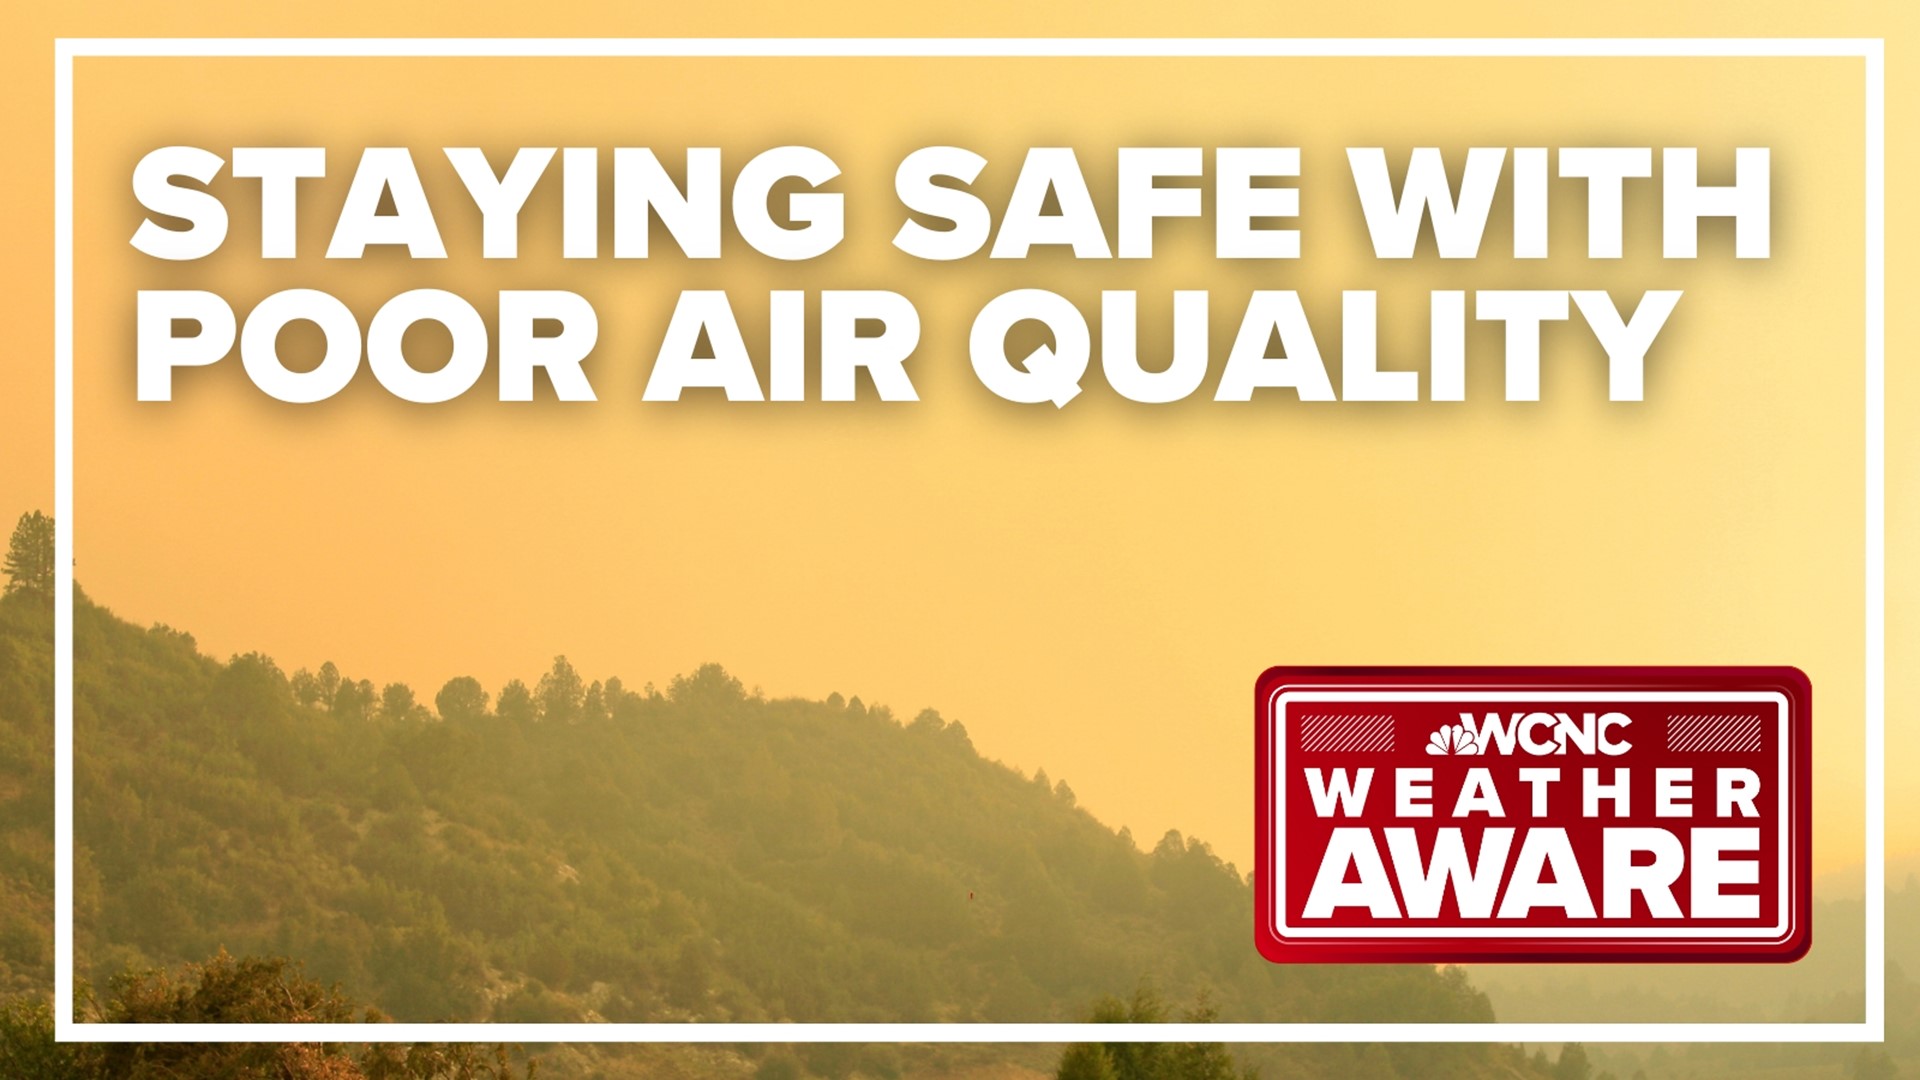 First, when we have these Weather Aware days, we're pulling data from whats called the air quality index.